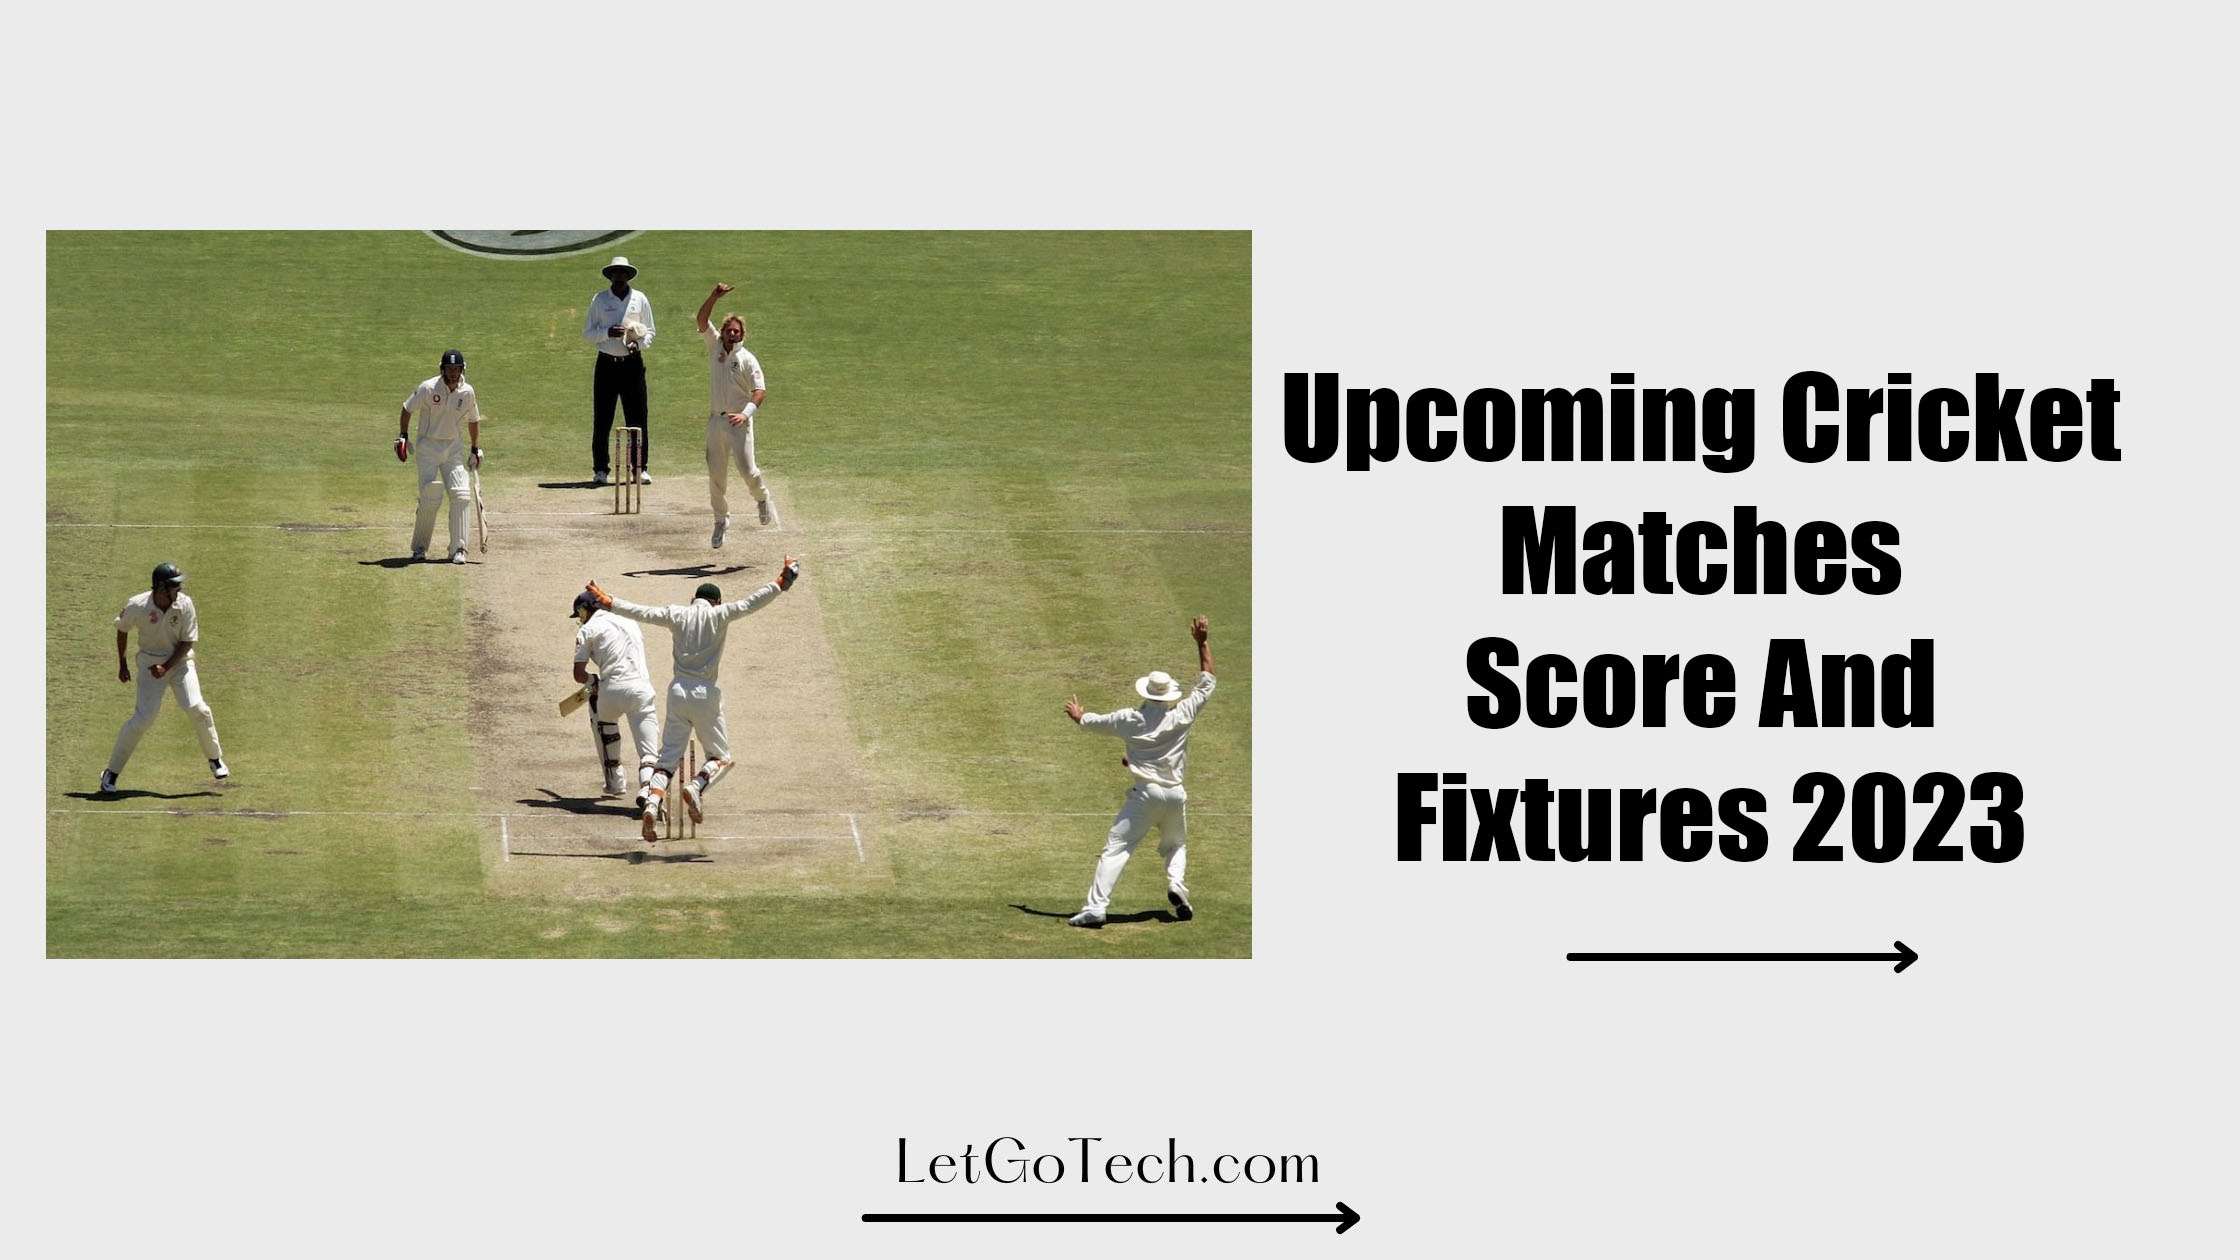 Upcoming Cricket Matches Score And Fixtures